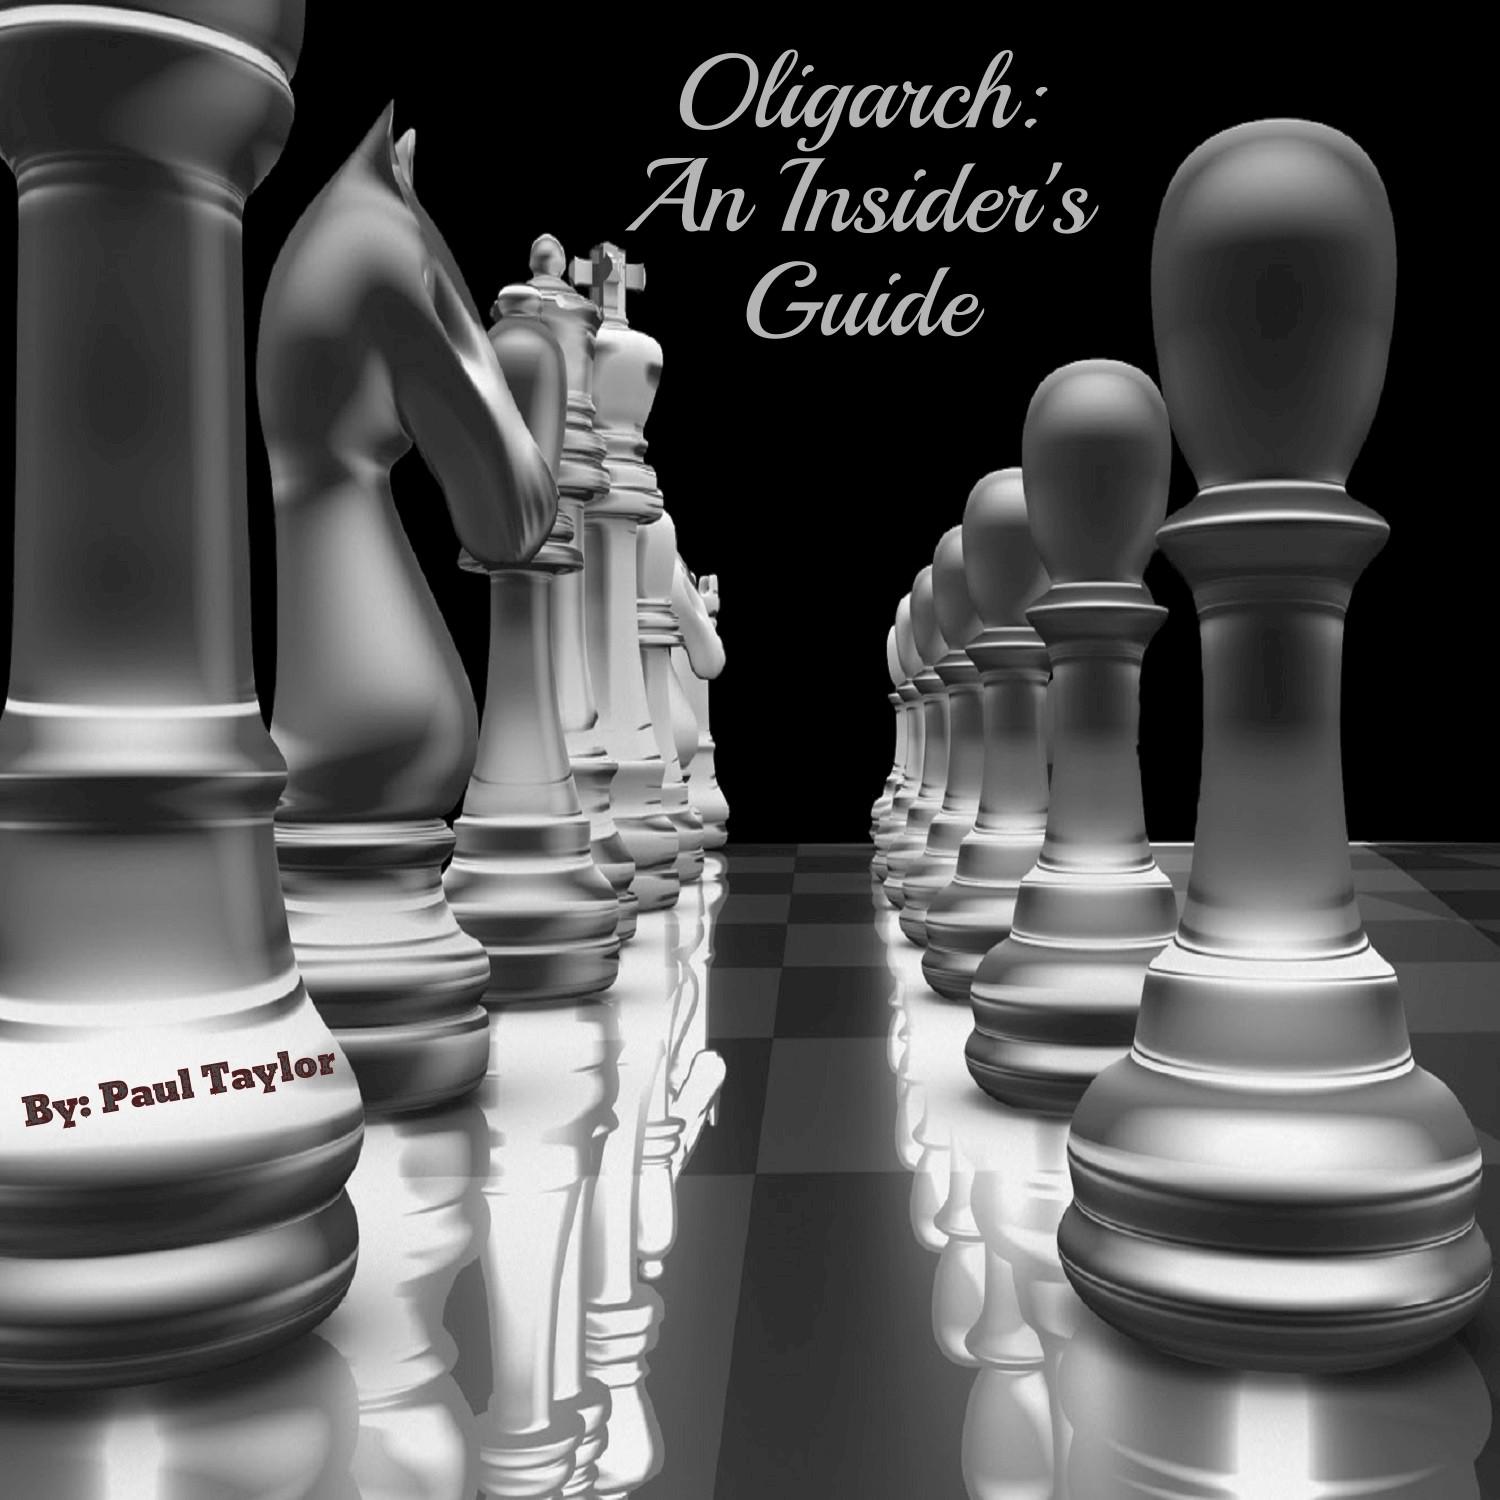 Oligarch: An Insider's Guide